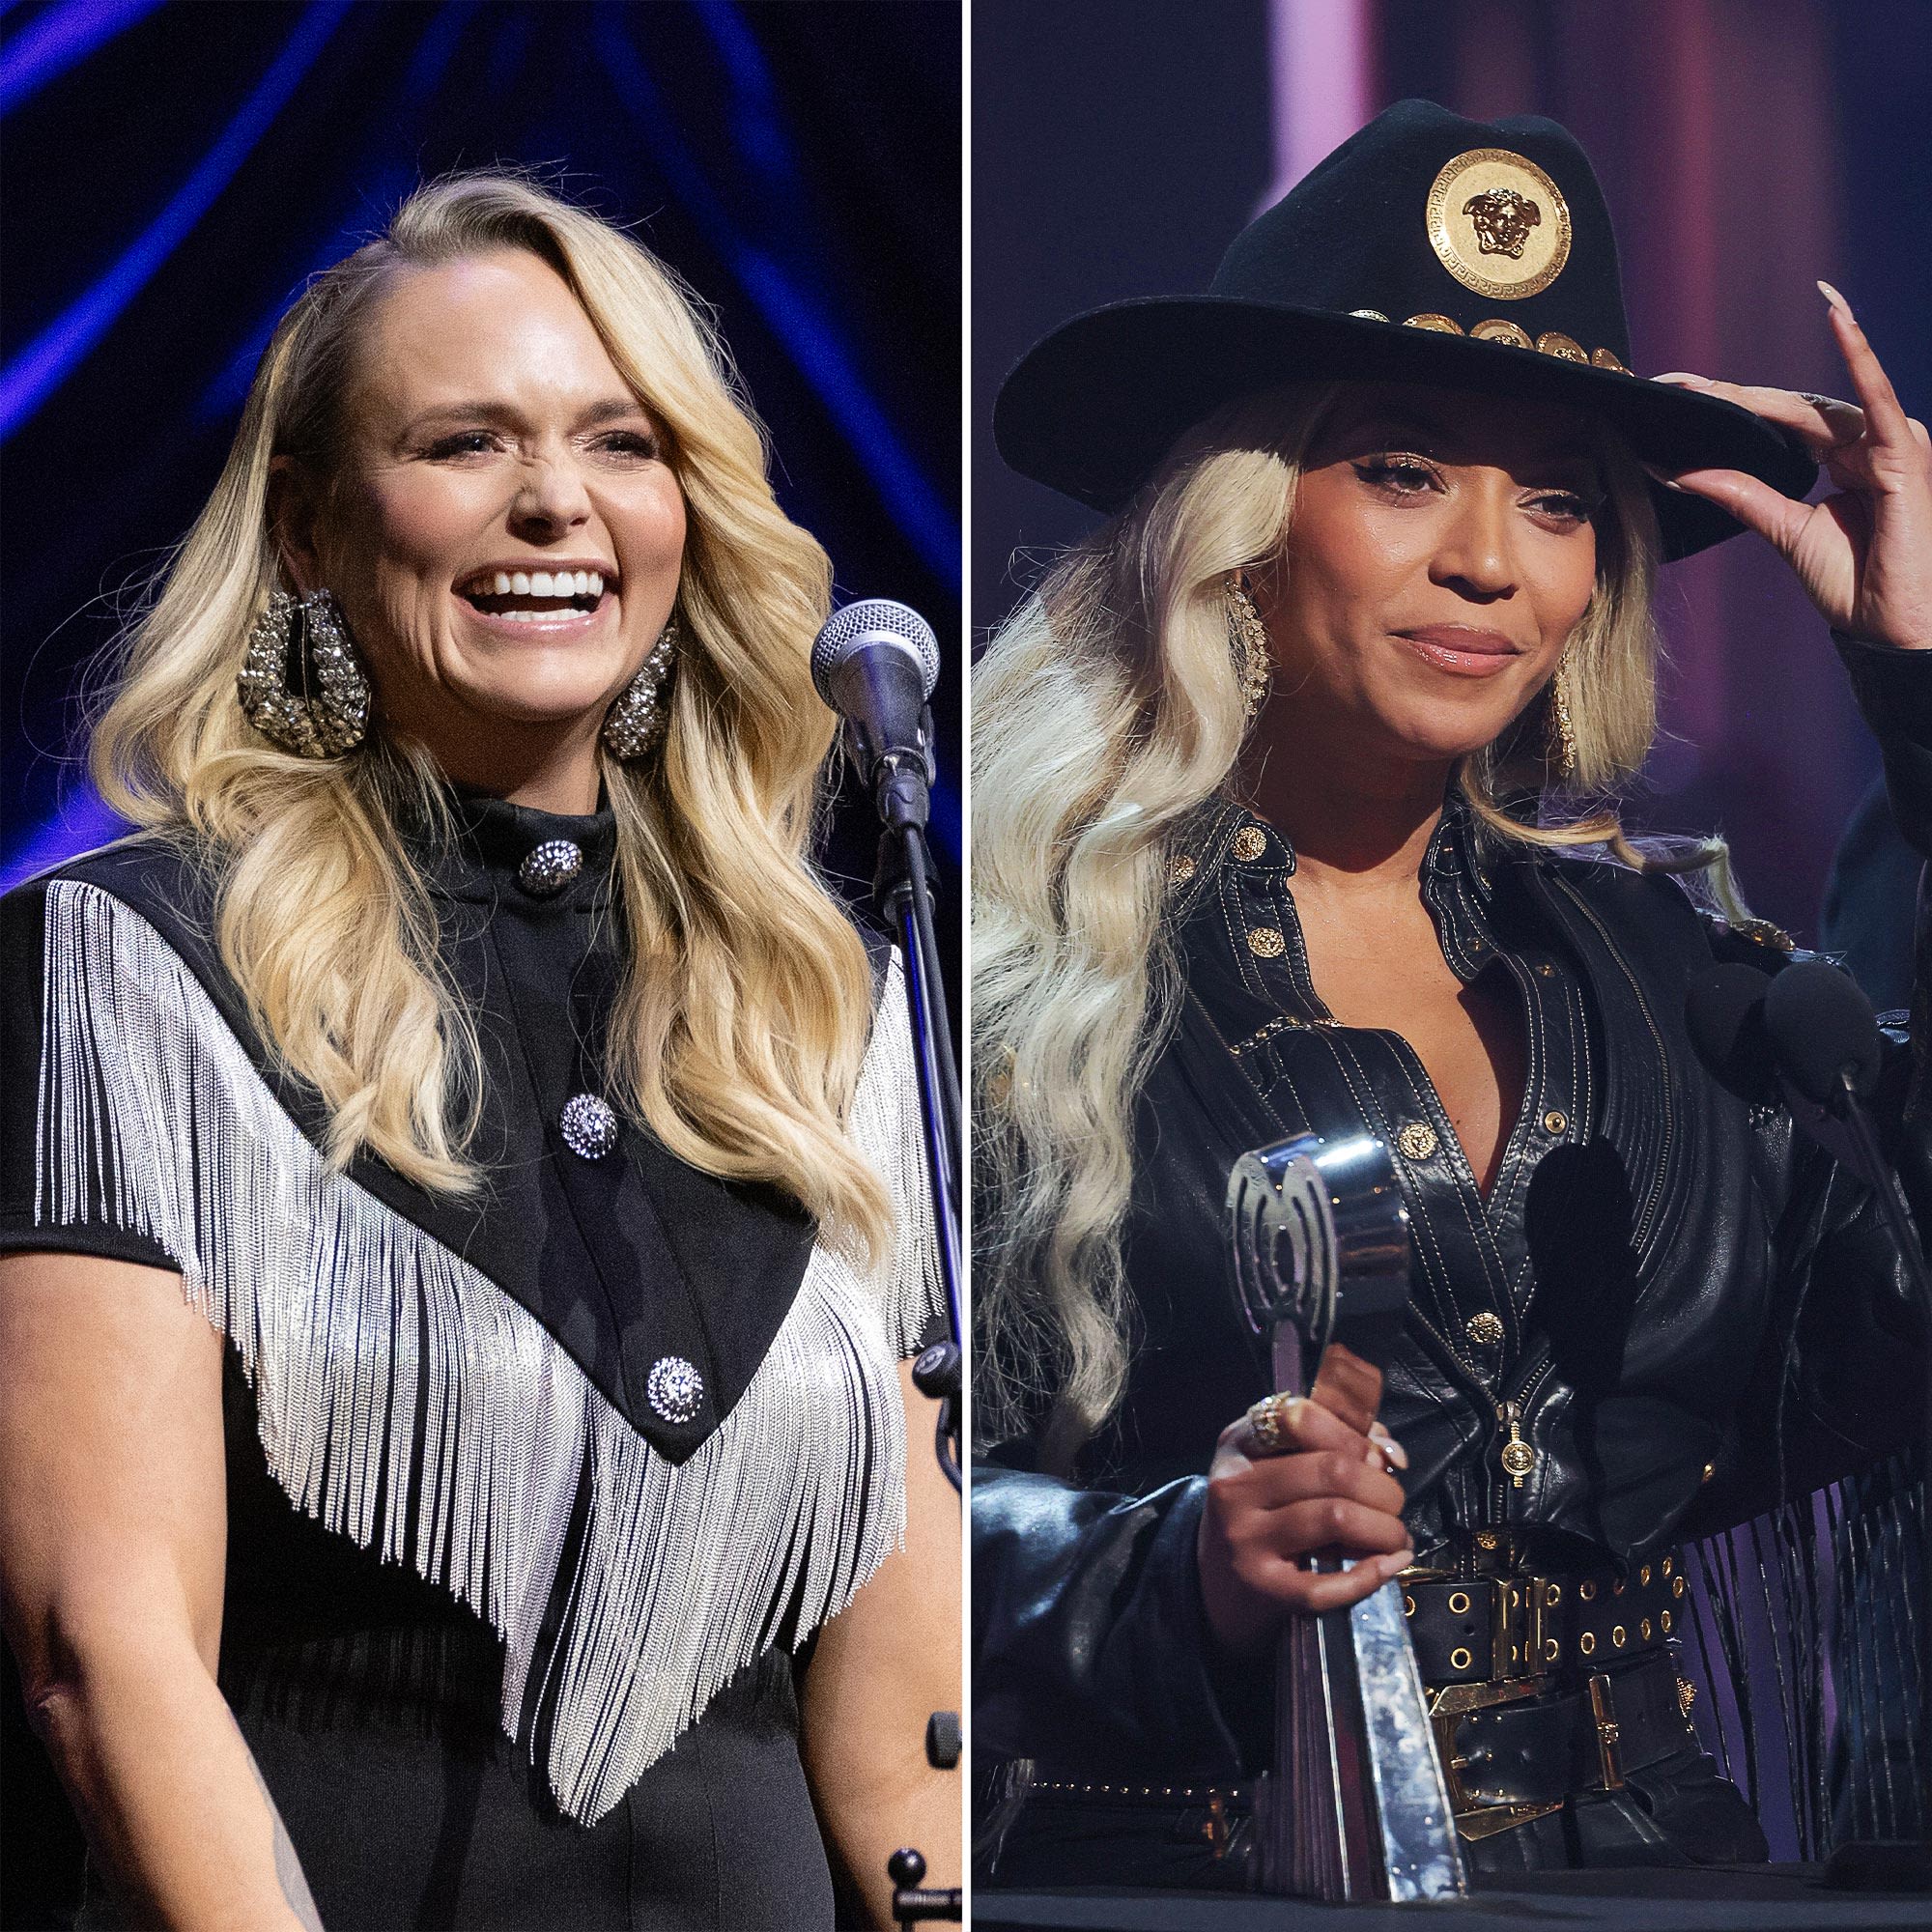 Miranda Lambert Reacts to Beyonce’s Country Music Success, Says She Approves of ‘Authenticity’